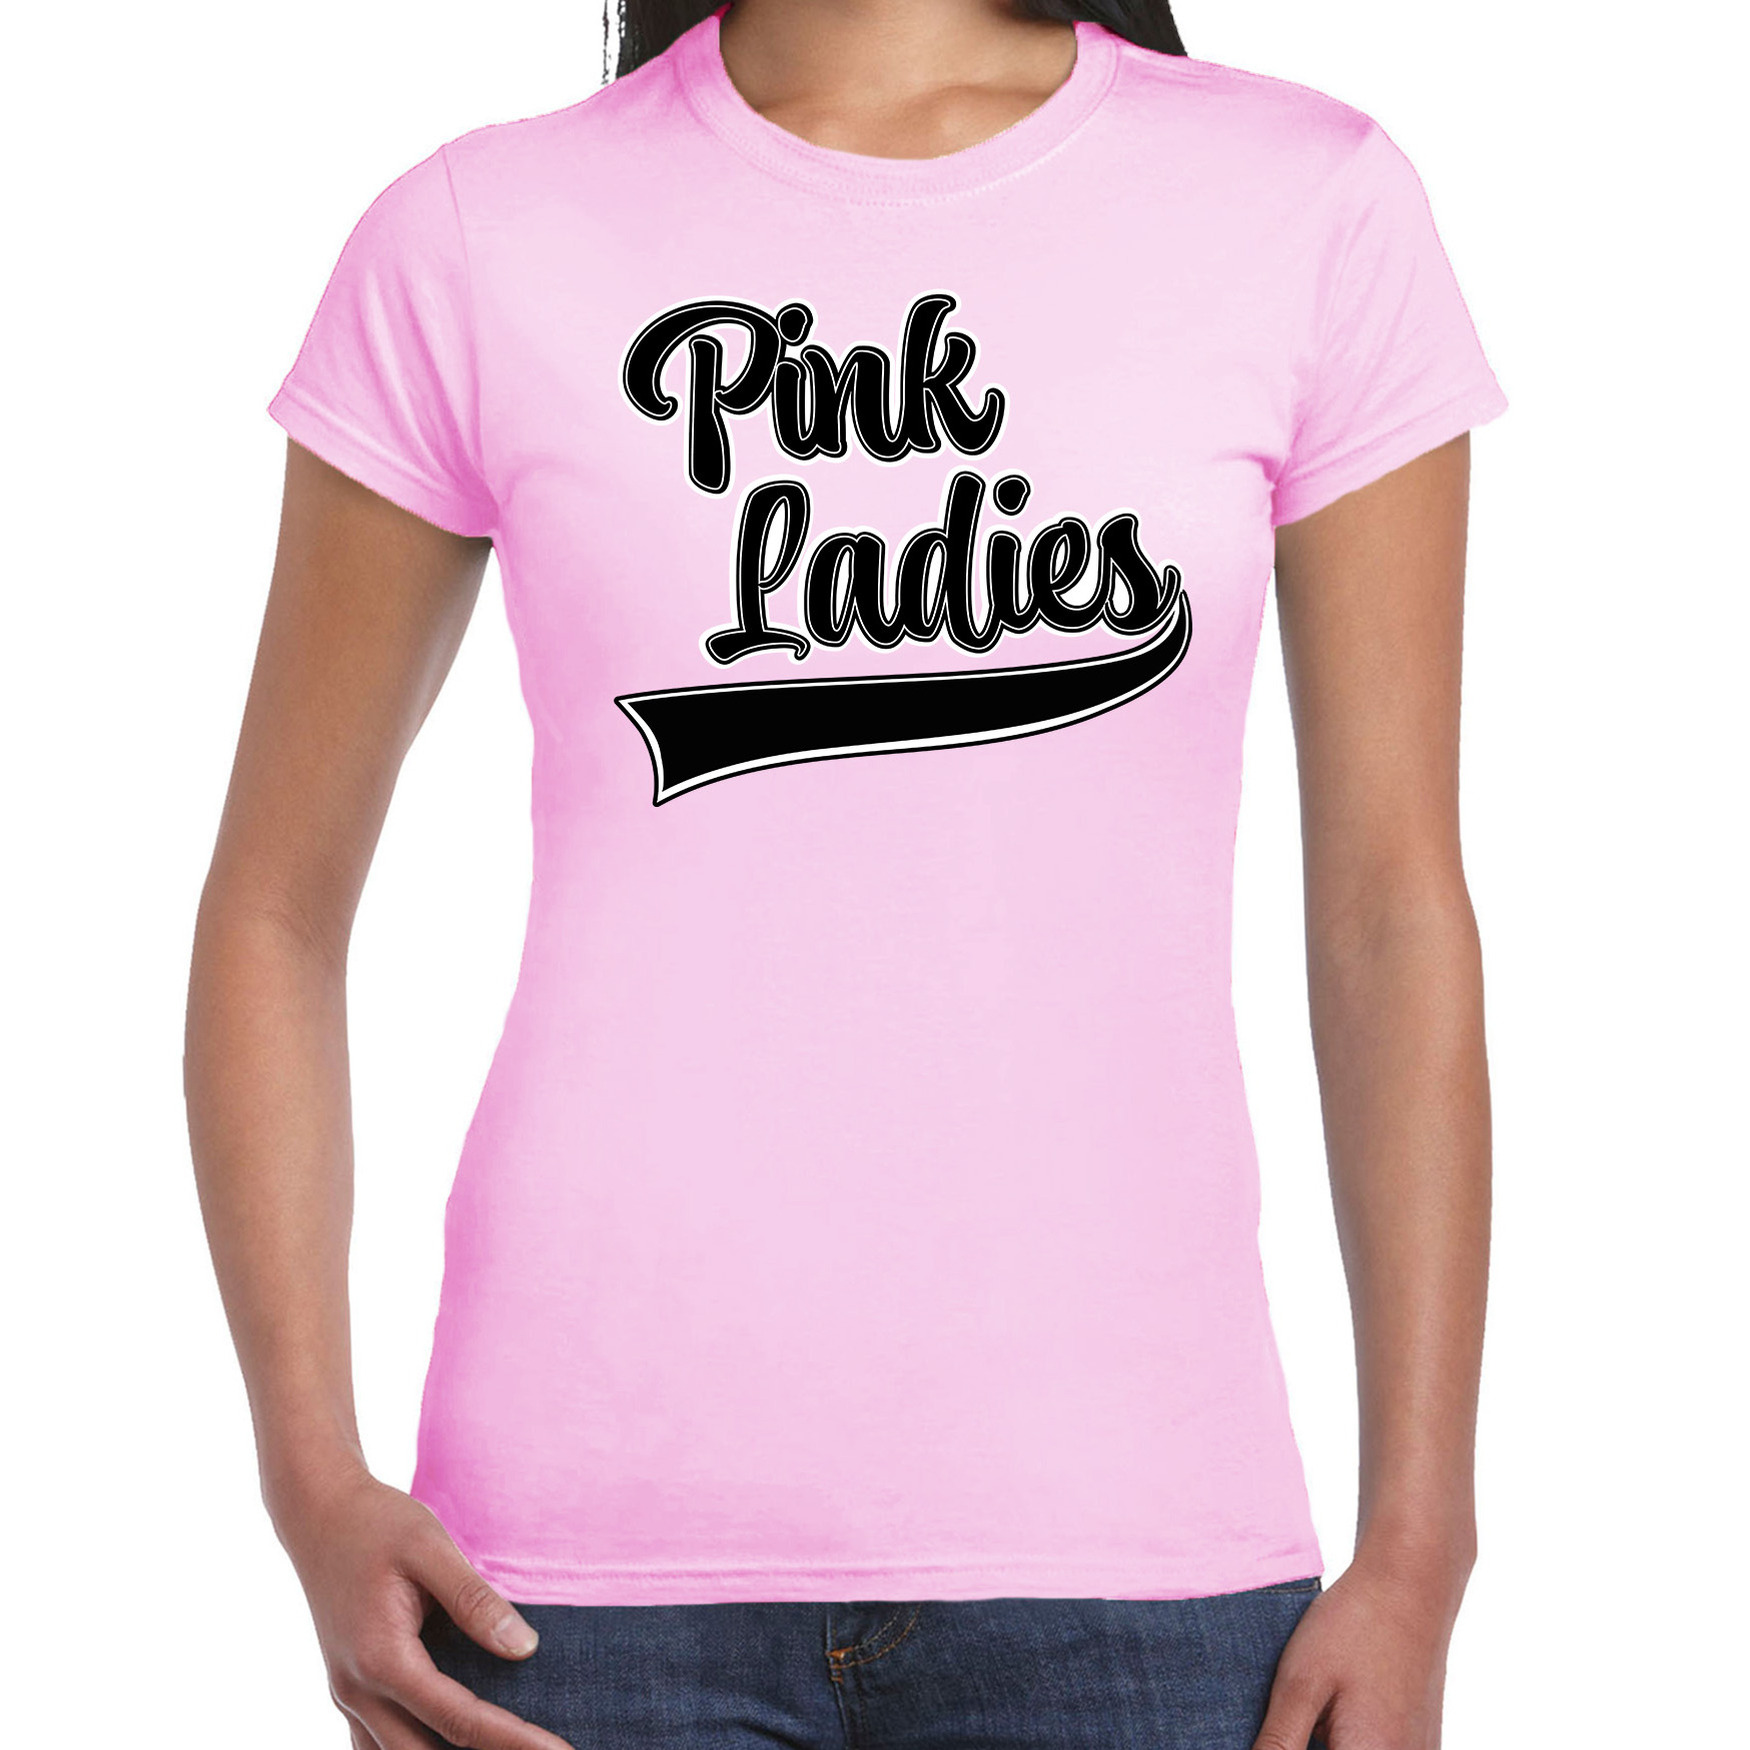 T-shirt Grease Pink ladies lichtroze carnaval shirt